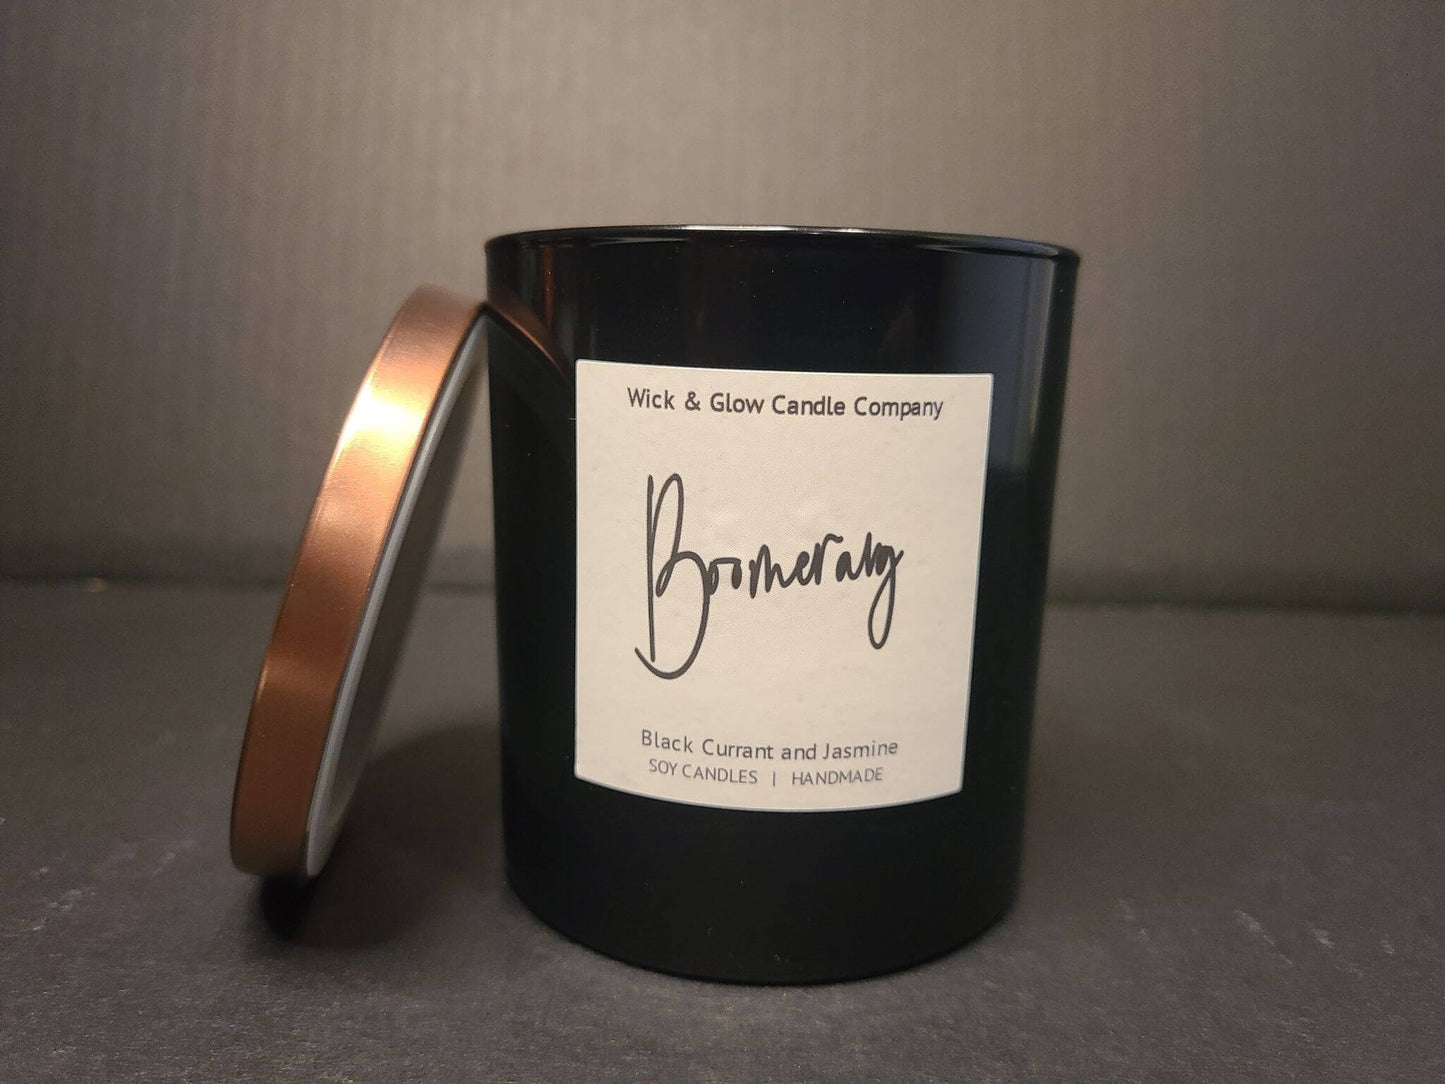 Boomerang- Black Currant and Jasmine Luxury Scented Candle - The Wick and Glow Candle Company